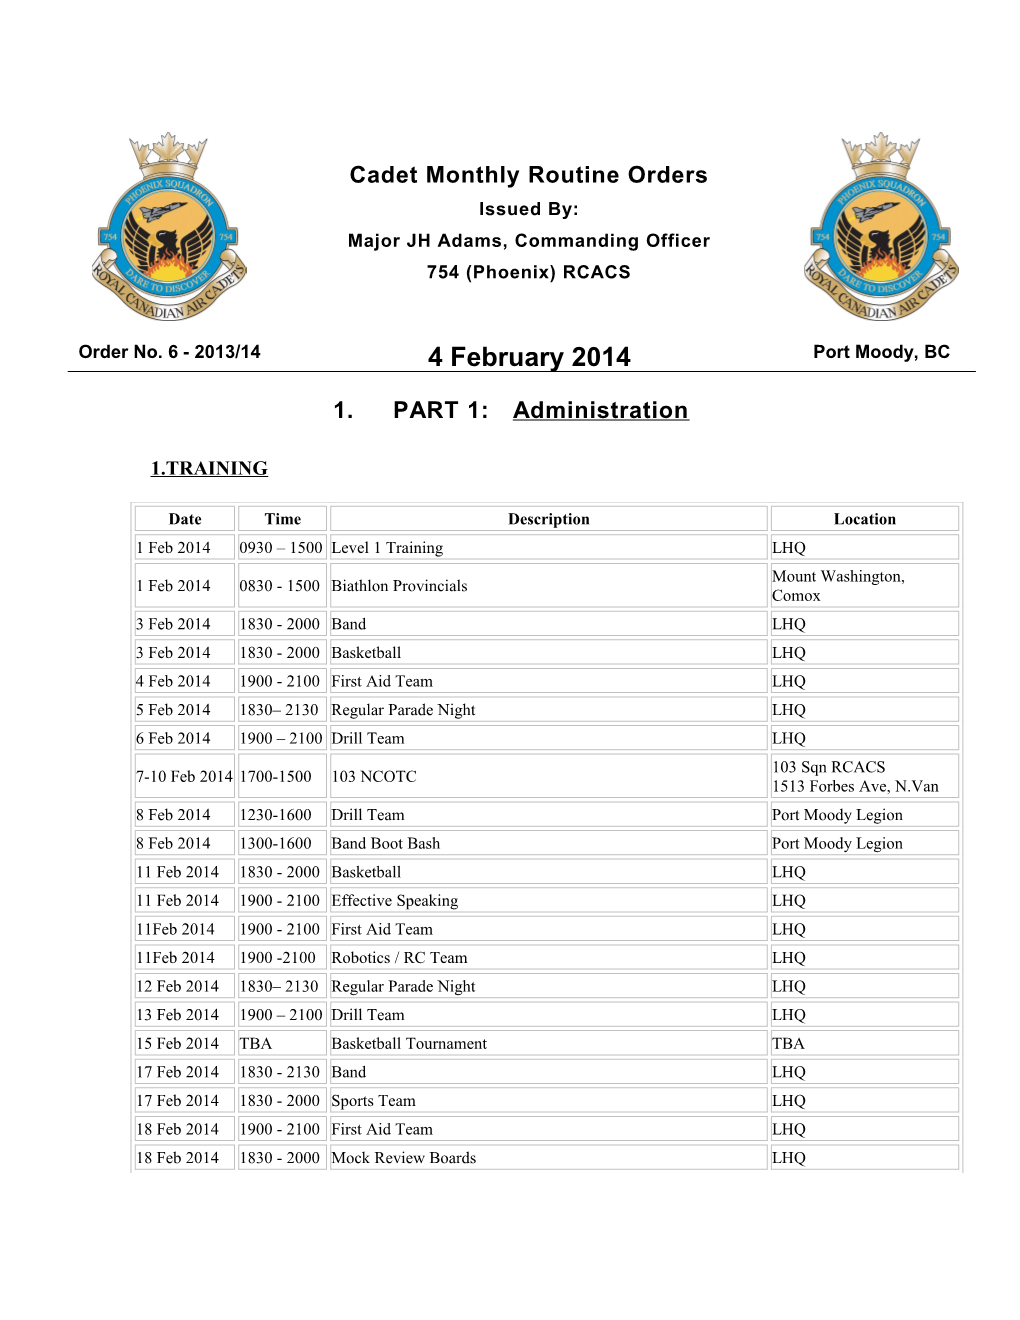 Cadet Monthly Routine Ordersissued By:Major JH Adams, Commanding Officer754 (Phoenix) RCACS